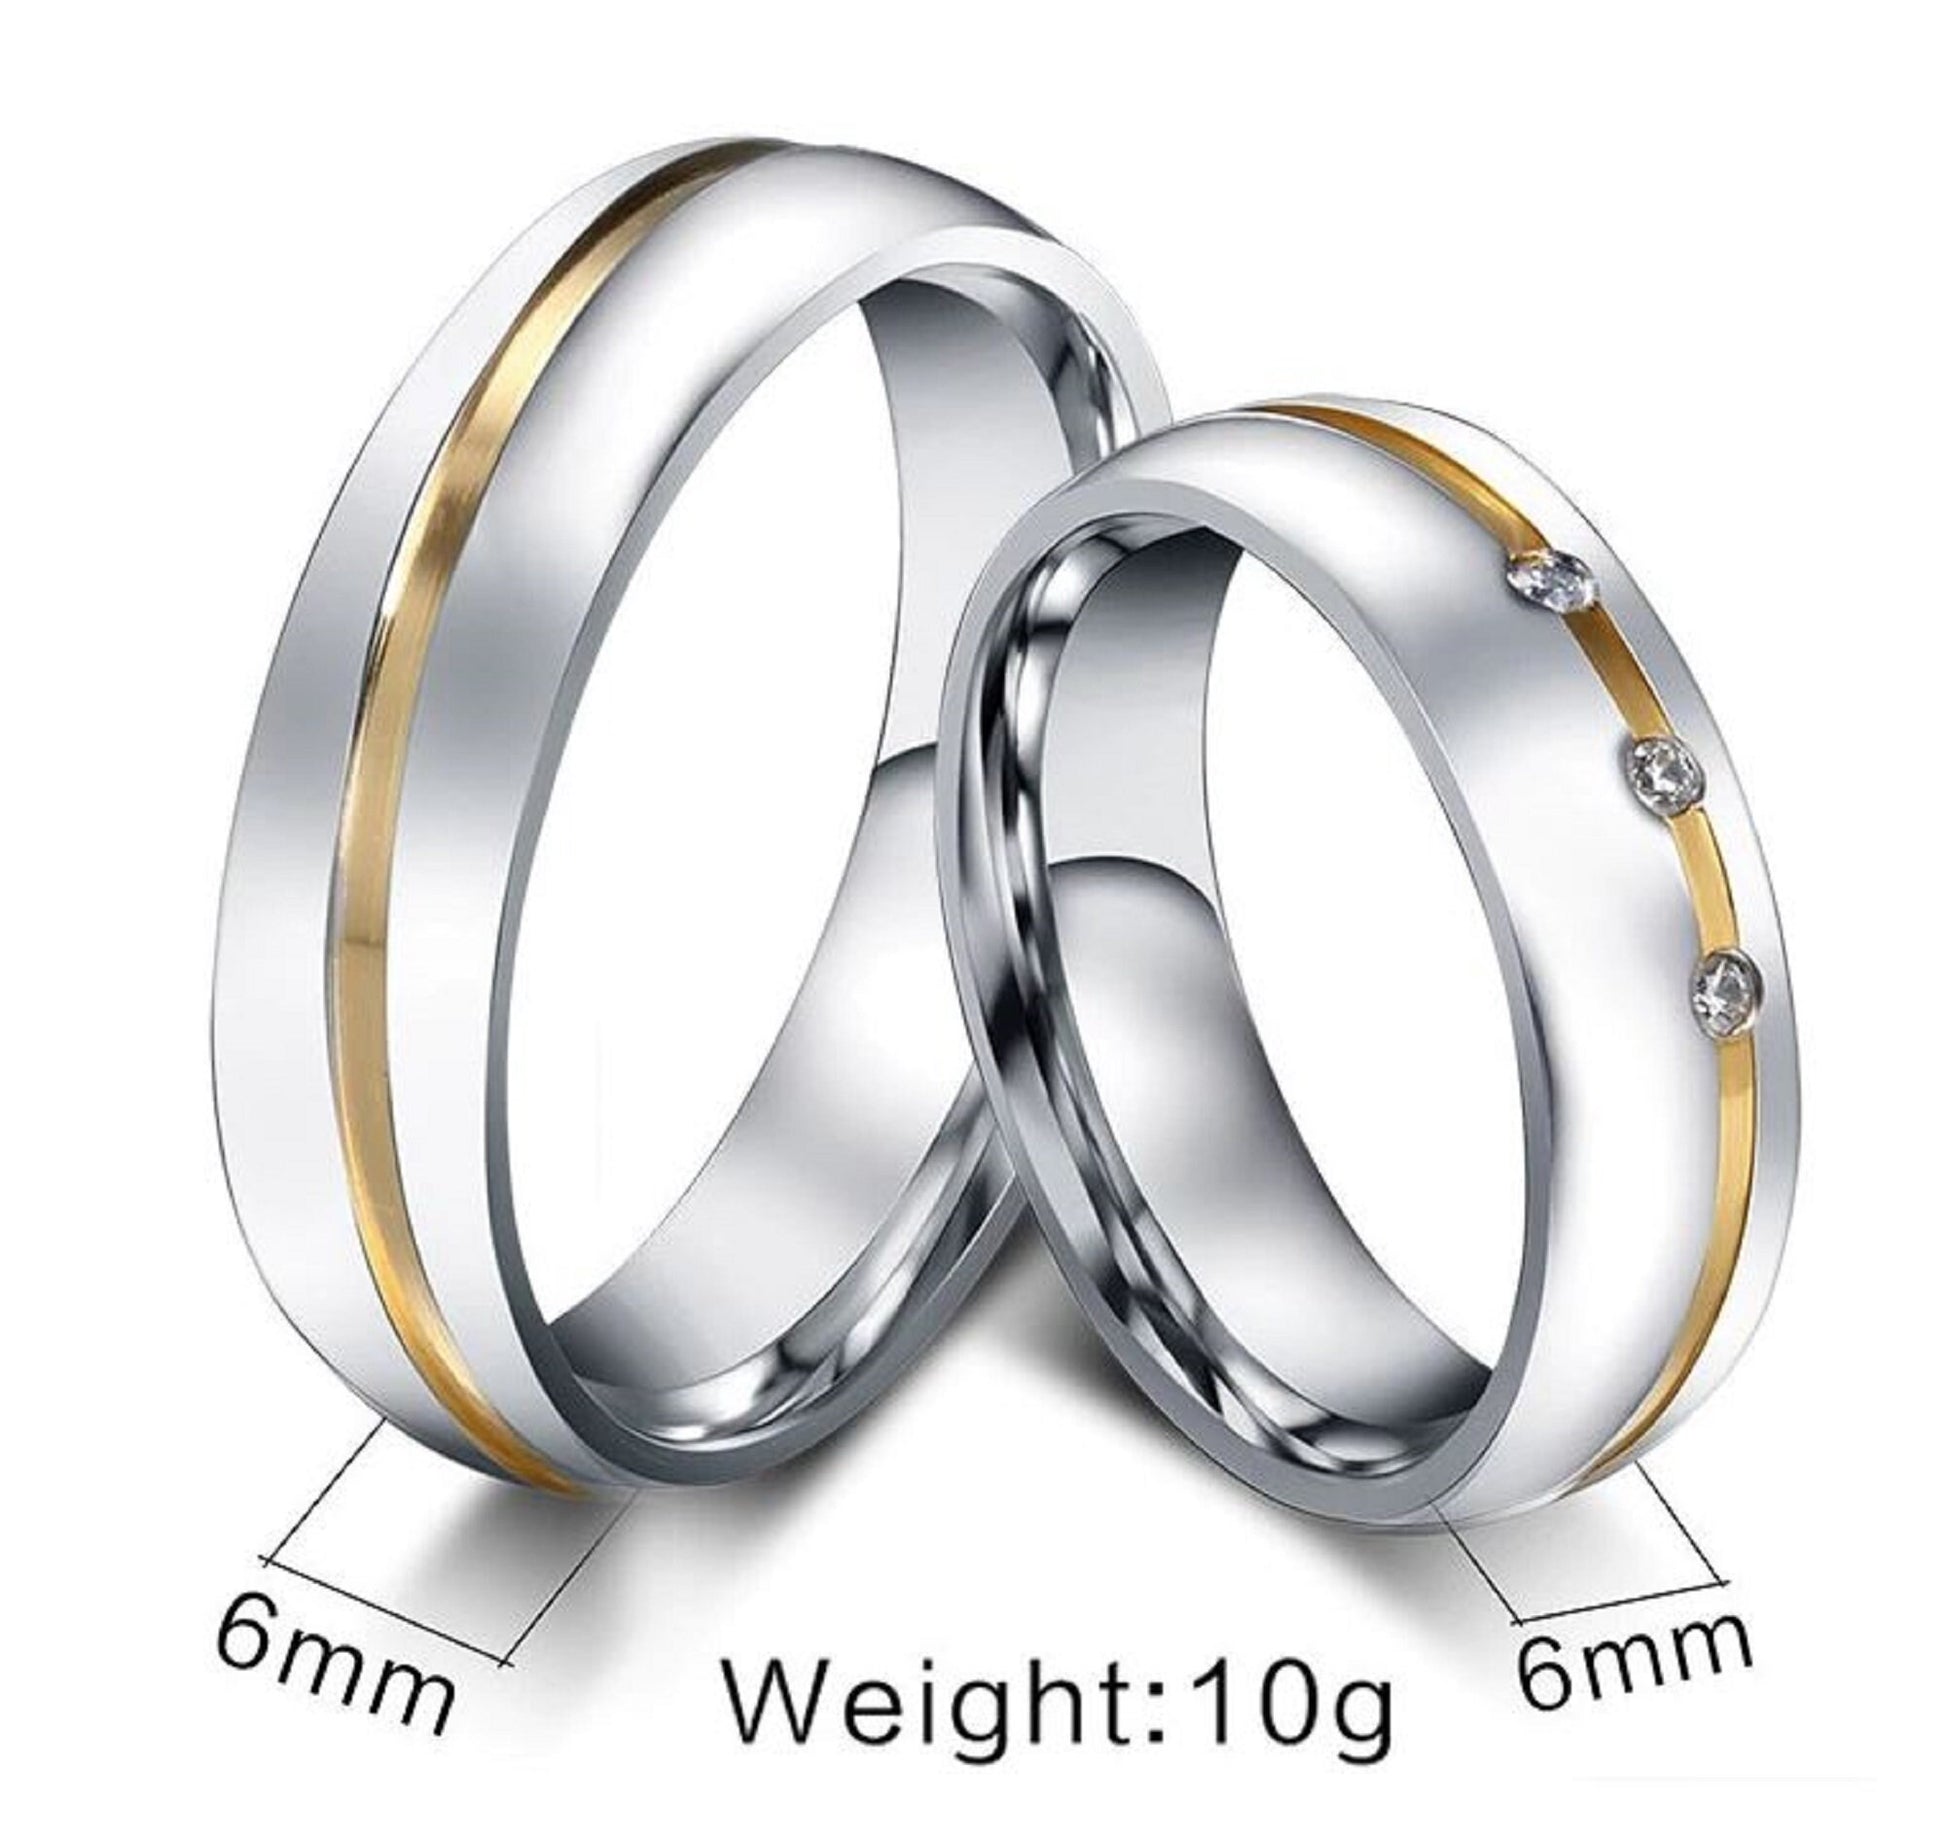 Silver Gold Couples Ring Set Stainless Steel & ION Gold Cubic Zirconia Never Fade - Friendship, Promise, Engagement, Wedding Set